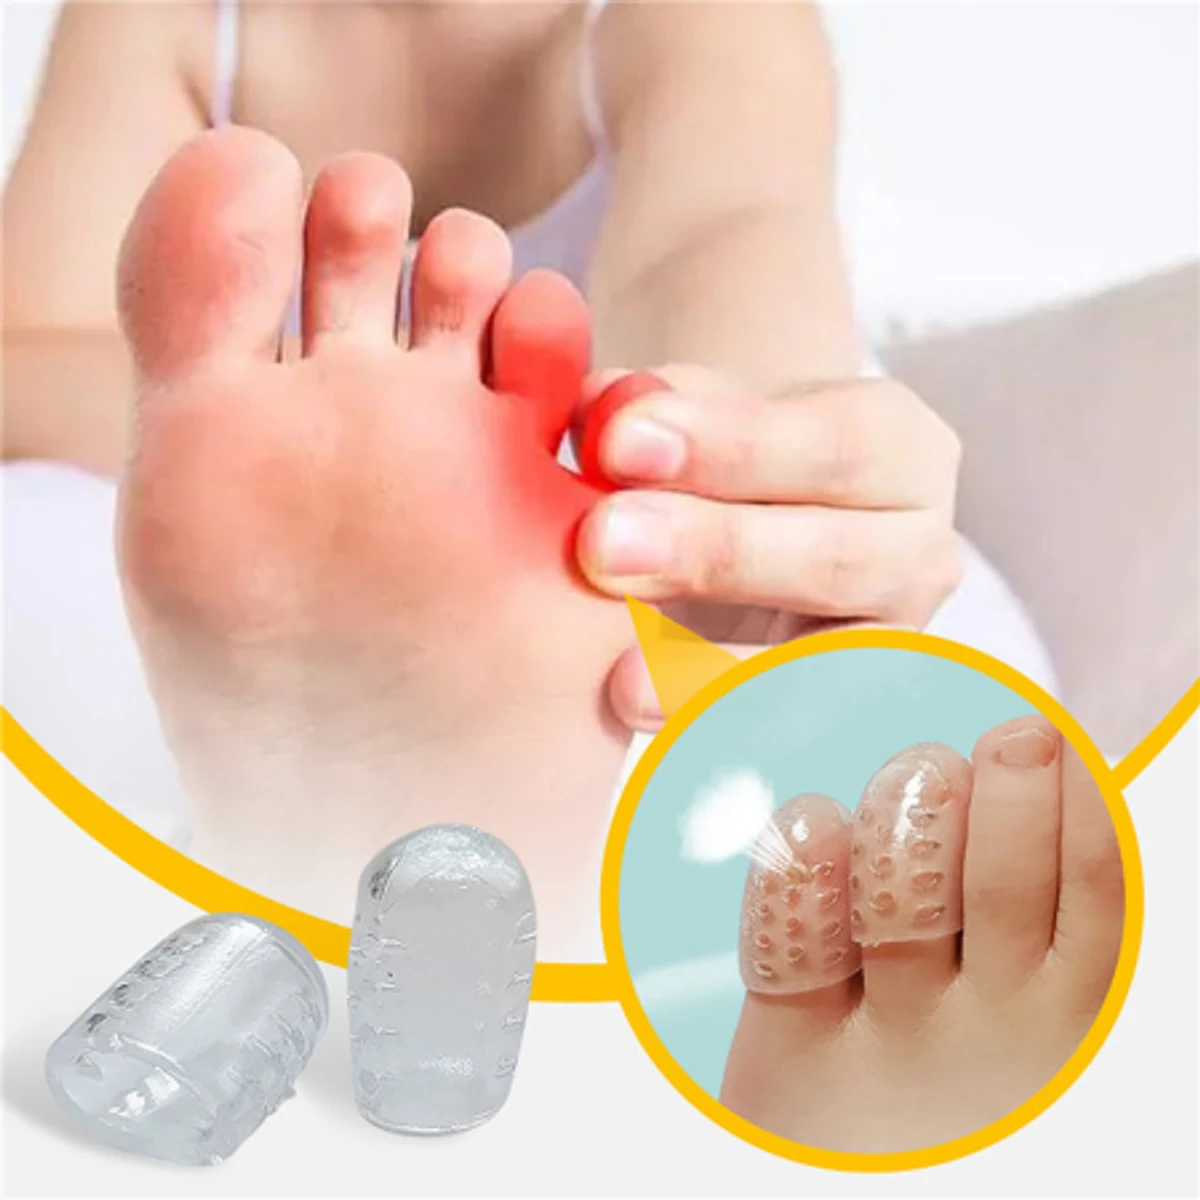 10Pcs Breathable Sleeve Toe Protector Silicone Anti-Friction Toe Caps Prevent Blisters Toe Cover Protector Foot Care